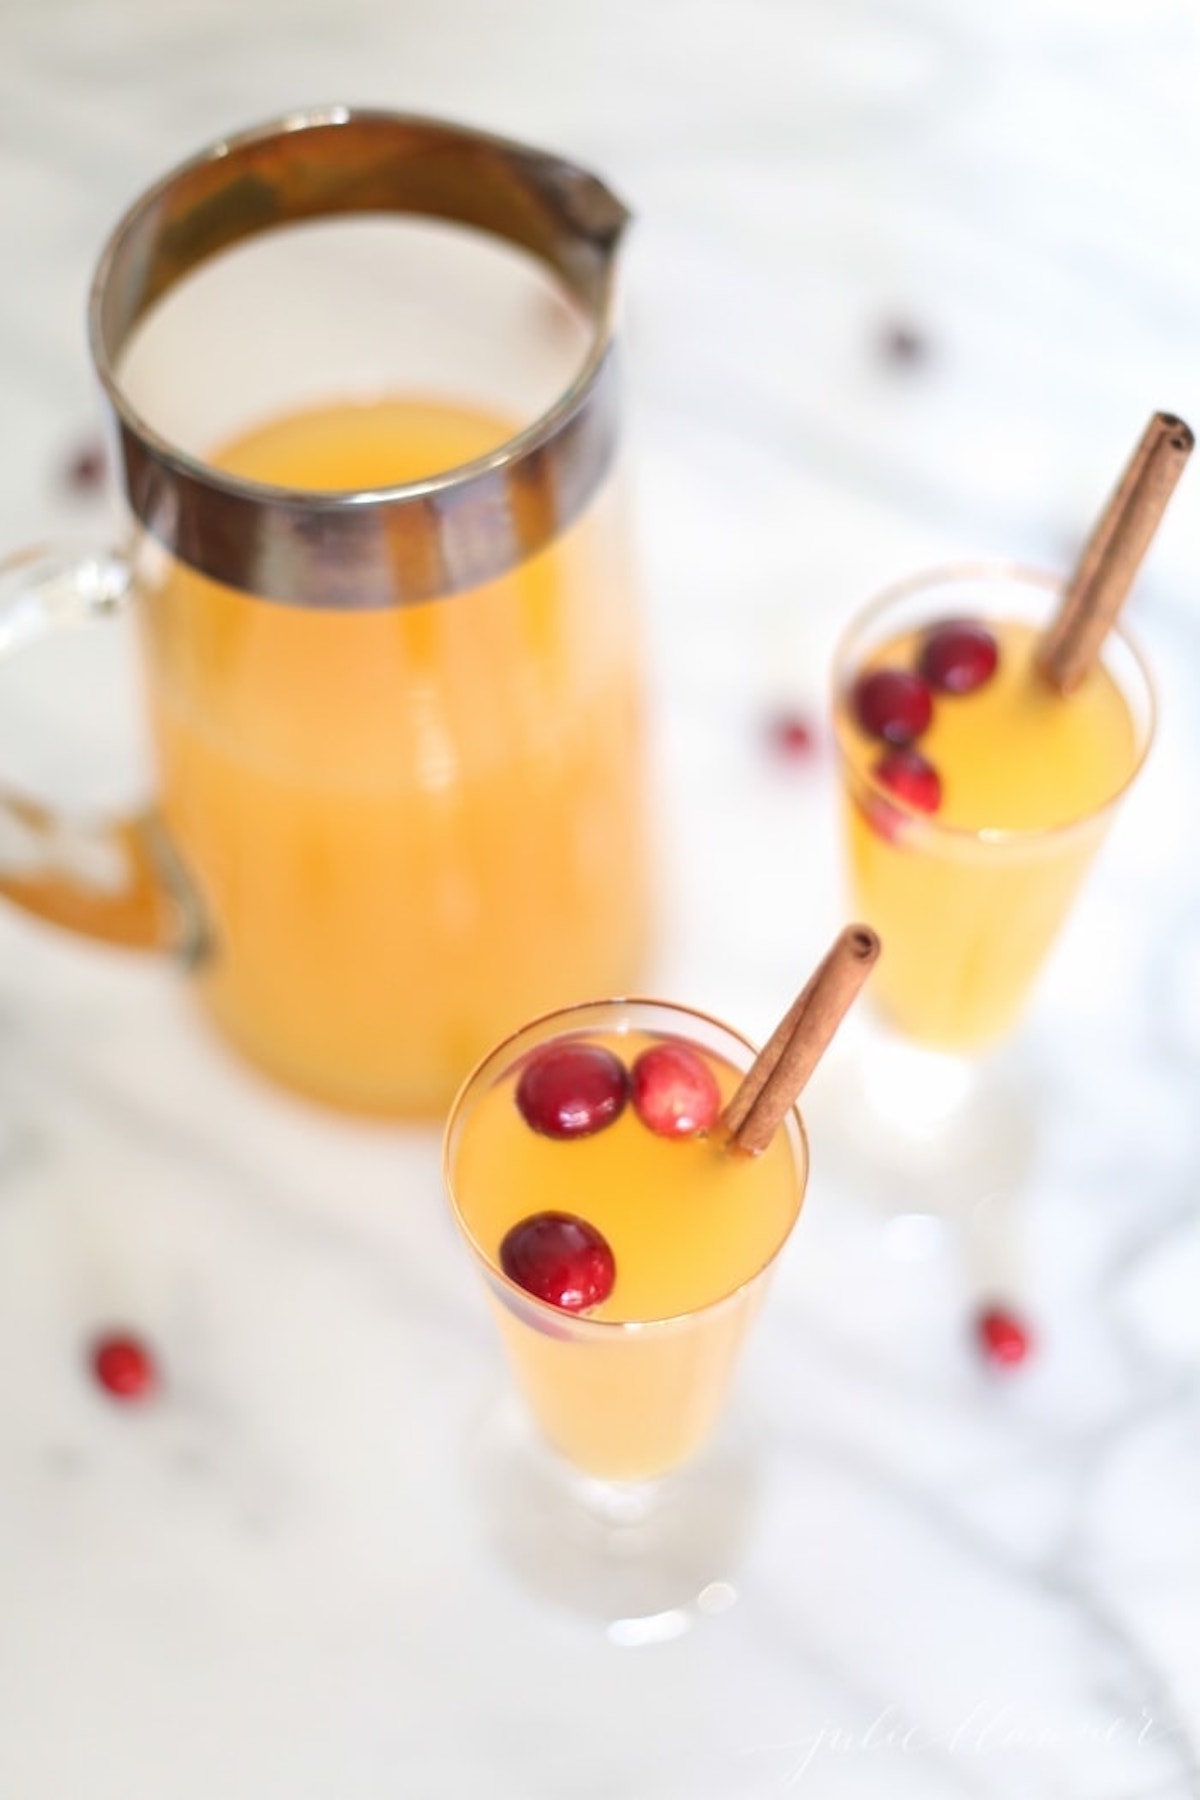 A pitcher and two glasses of yellow-orange pear prosecco cocktail, garnished with cranberries and cinnamon sticks, are placed on a white marble surface.